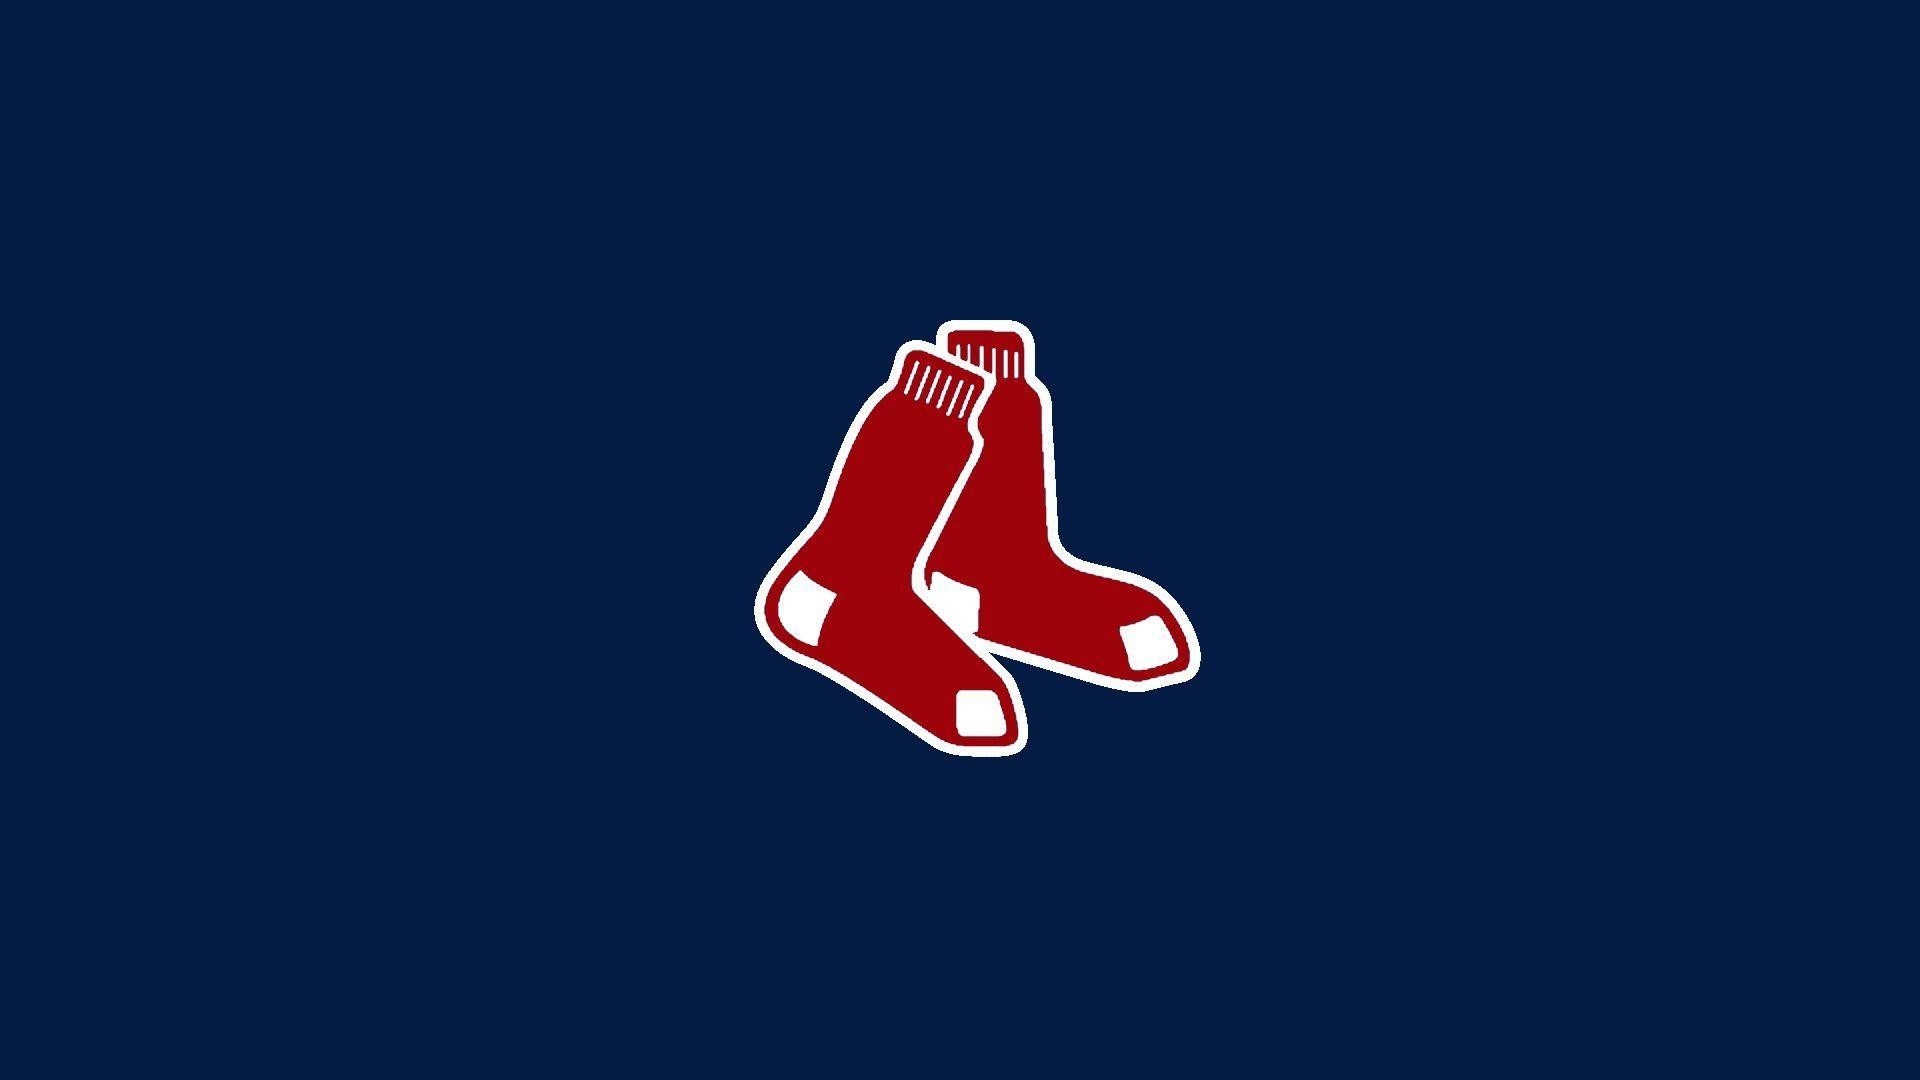 1920x1080 Boston Red Sox Wallpapers | HD Wallpapers Base